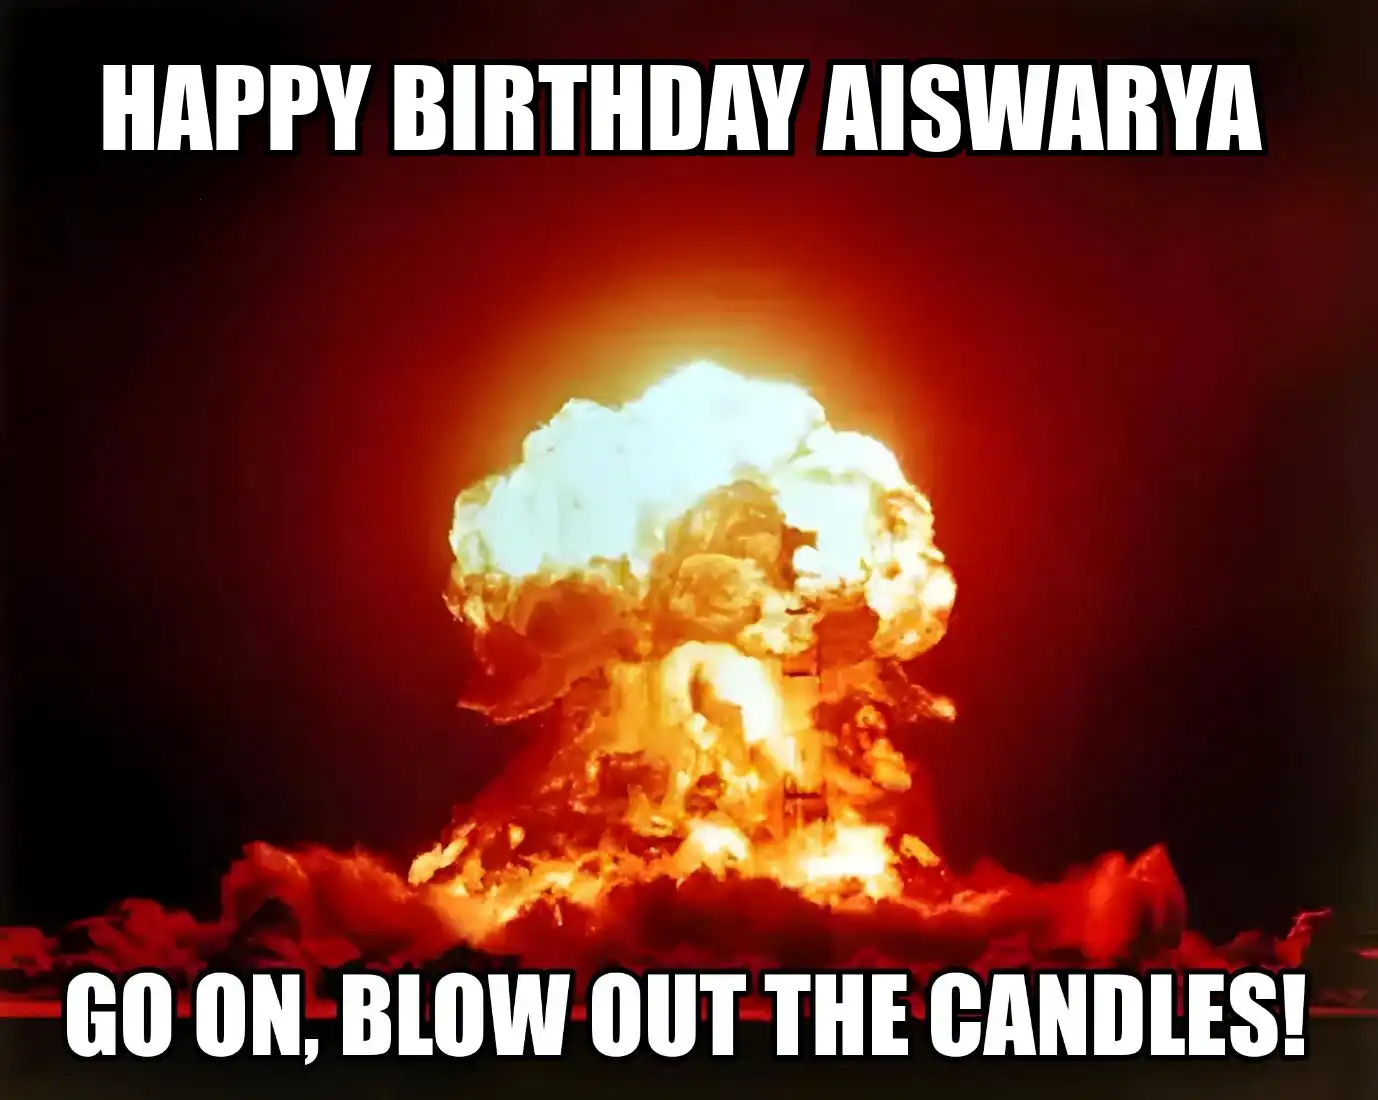 Happy Birthday Aiswarya Go On Blow Out The Candles Meme